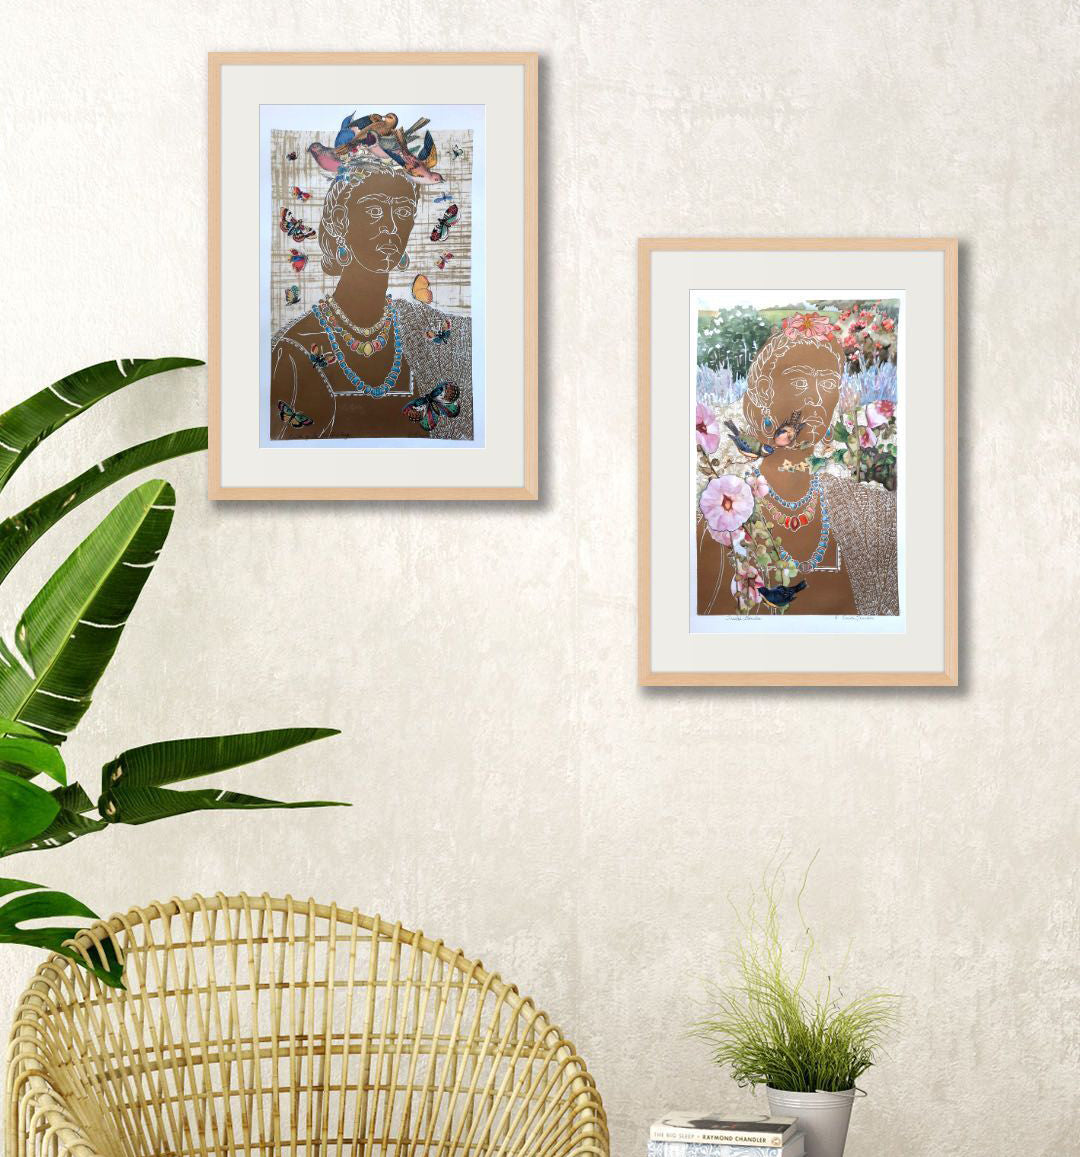 in situ view of both Fridas in frames, for sale by Ouida Touchon